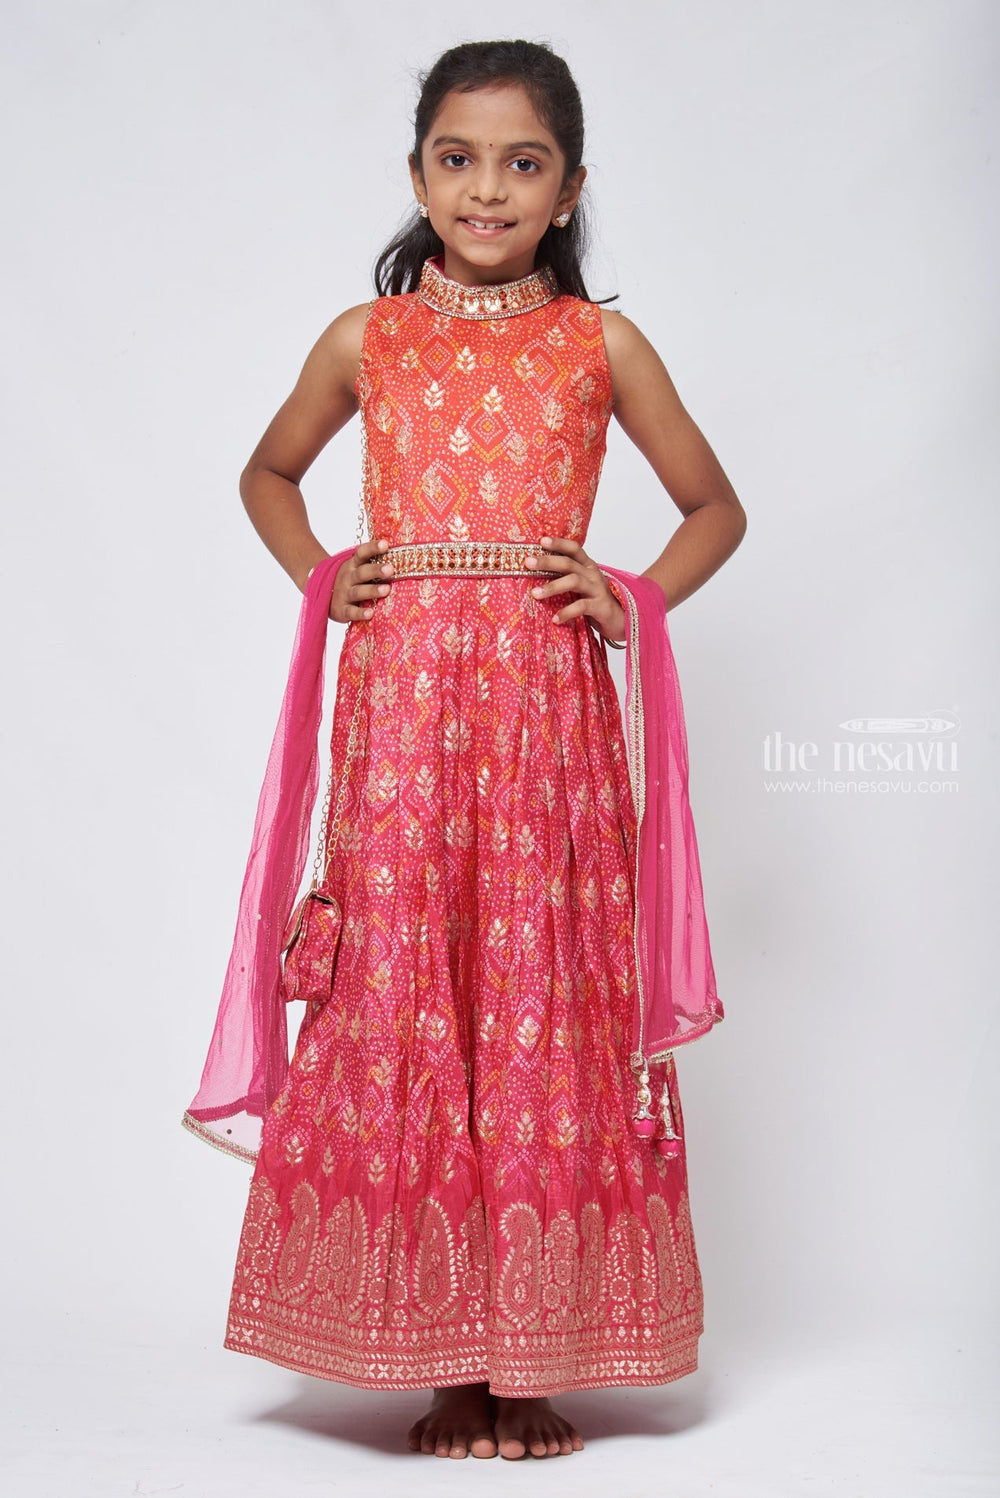 The Nesavu Silk Gown Kids Embroidered Anarkali Bandhani Brilliance in Pink & Orange with Mirror Detailing - Traditional Festive Wear for Girls Nesavu 24 (5Y) / Pink / Viscose Silk GA140A-24 Desi Anarkali For Kids | Designer Anarkali For Girls | The Nesavu